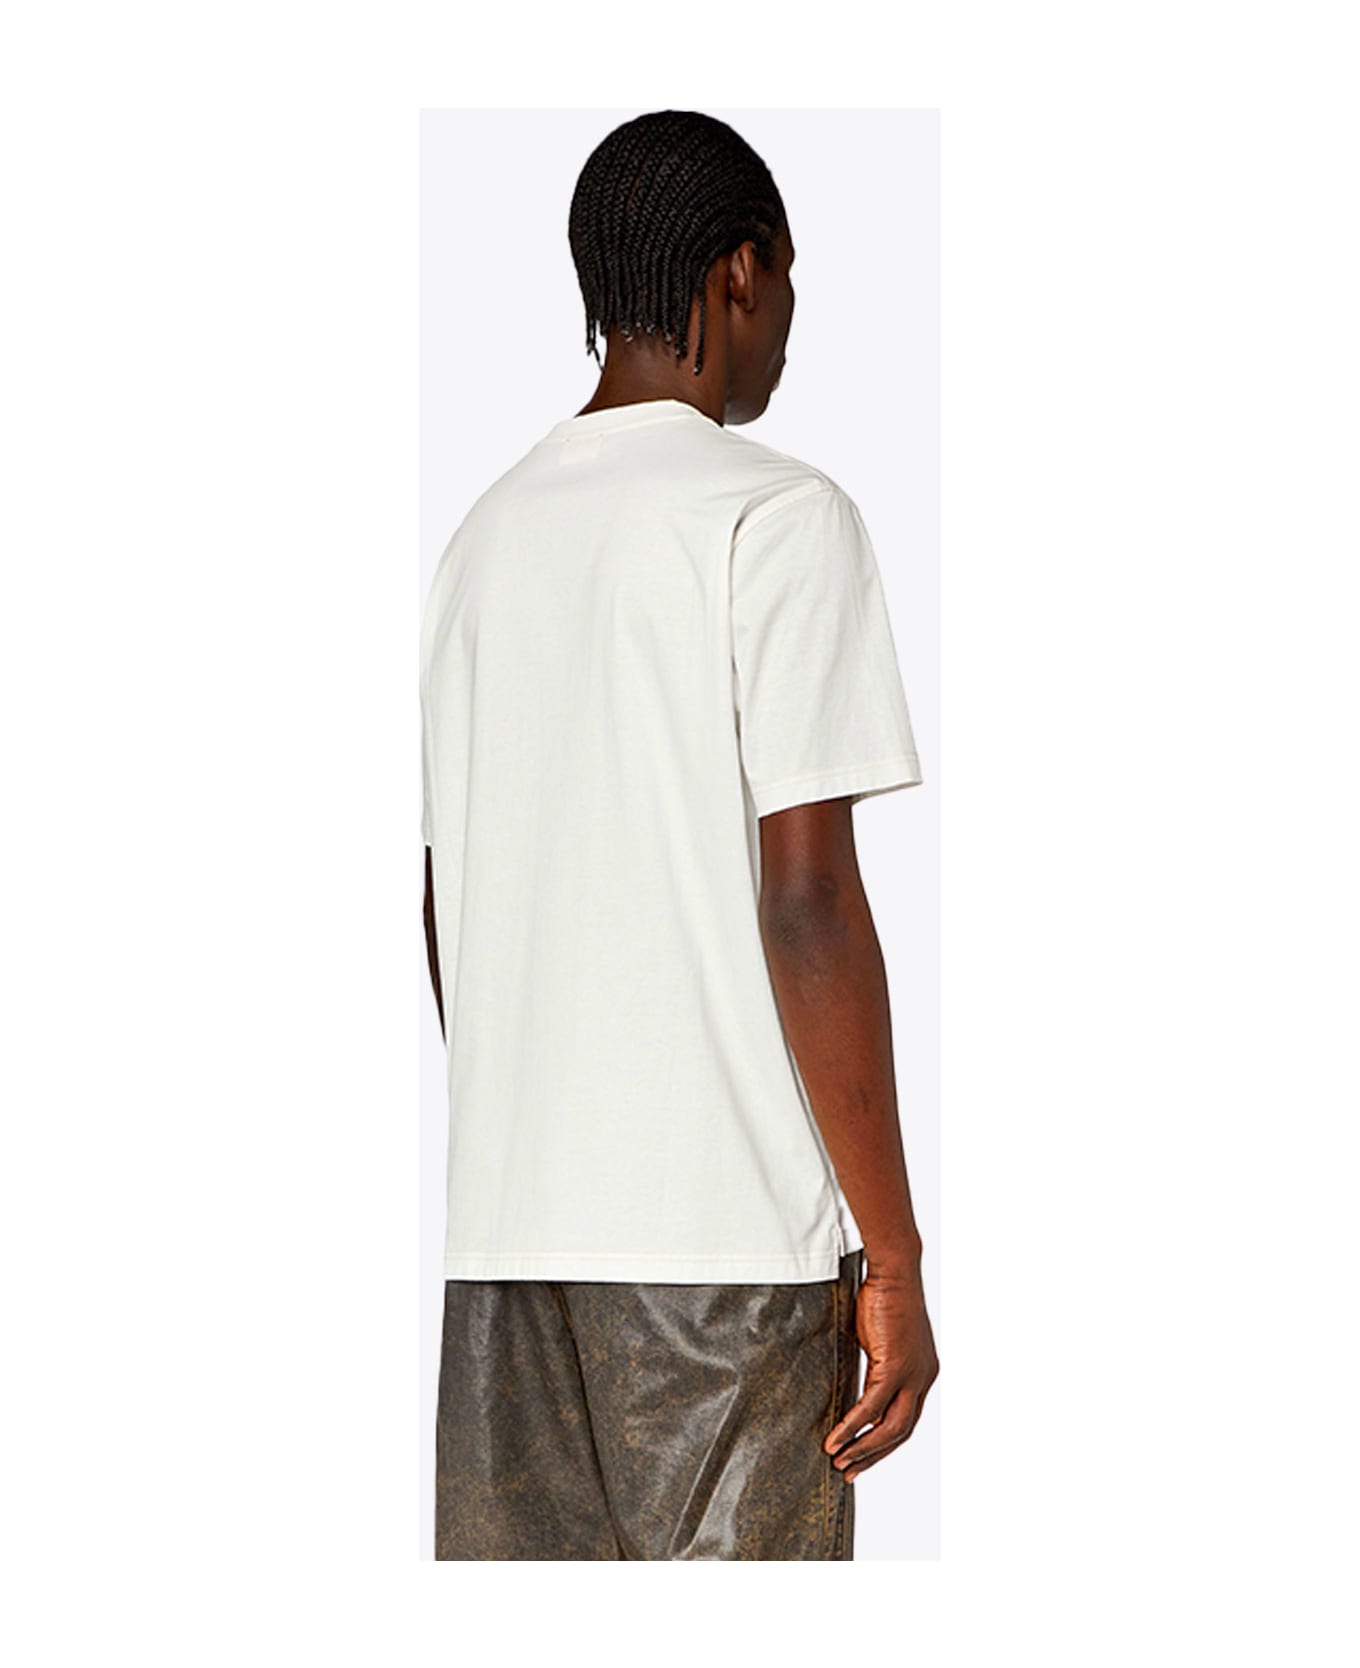 Diesel T-must-slits-n2 White cotton t-shirt with tonal print - T Must Slits N2 - Bianco